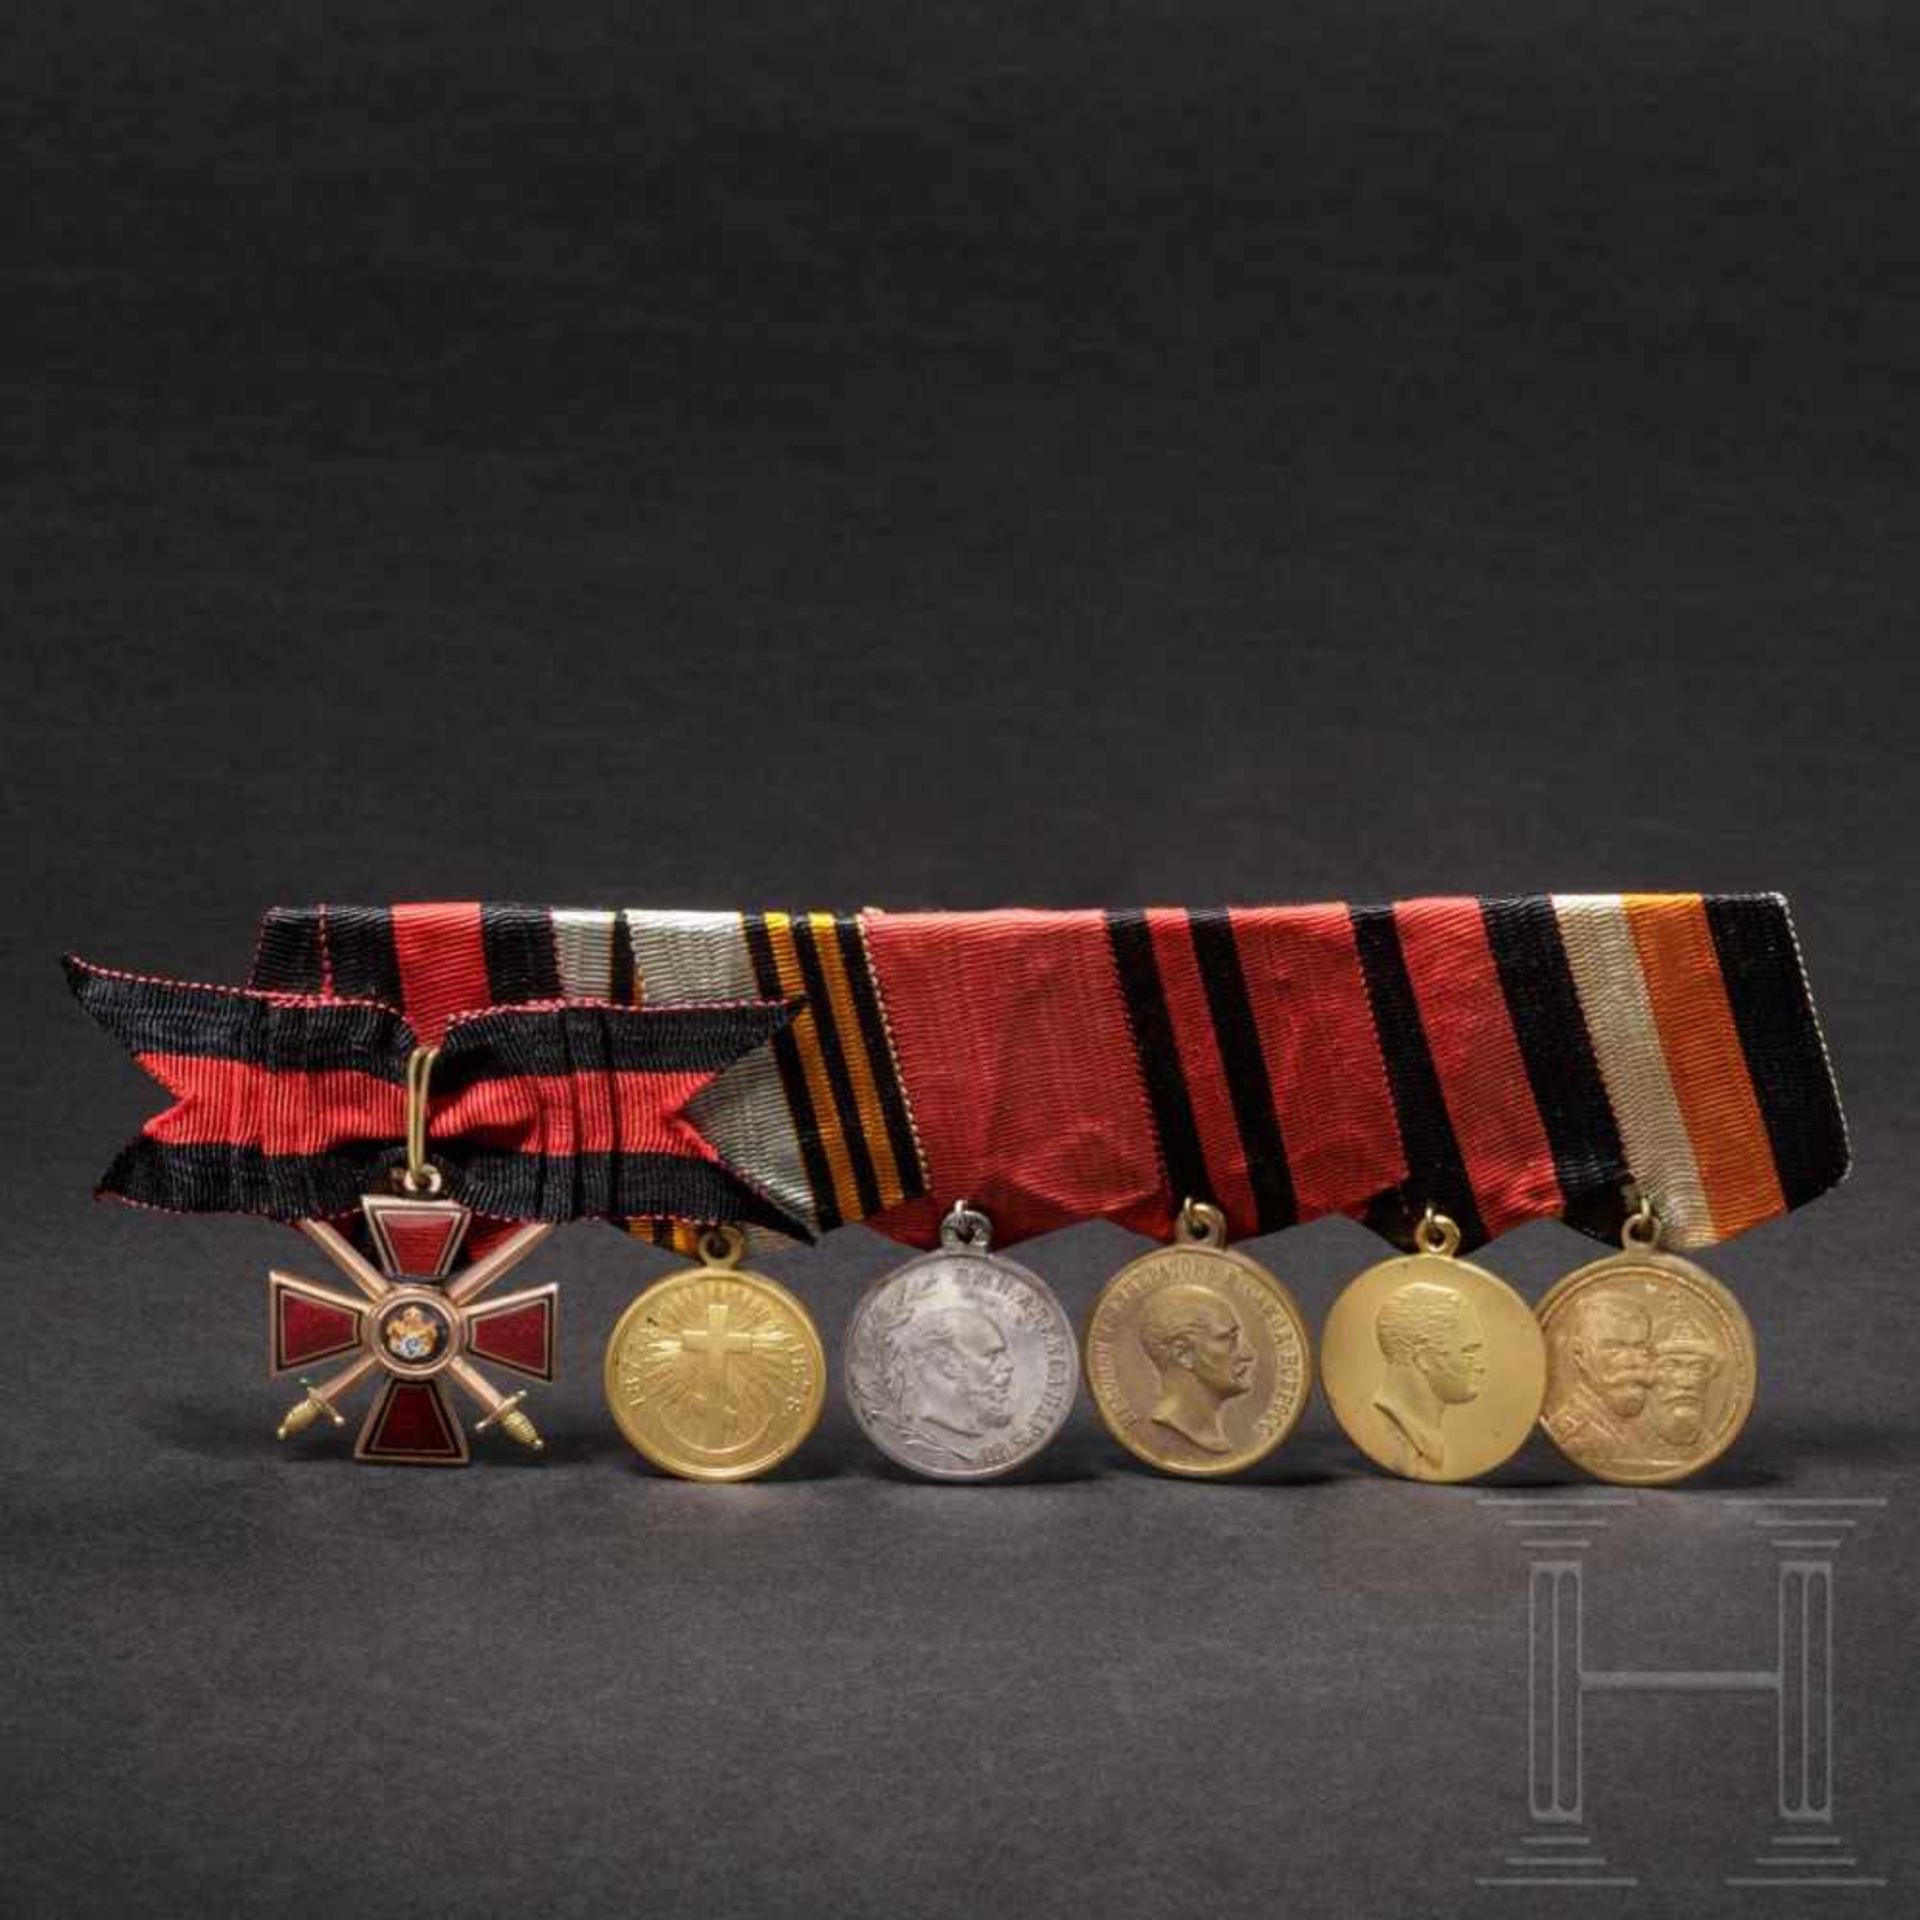 A Russian medal bar of orders with a Cross of the Order of St. Vladimir, 4th Class with Swords, five